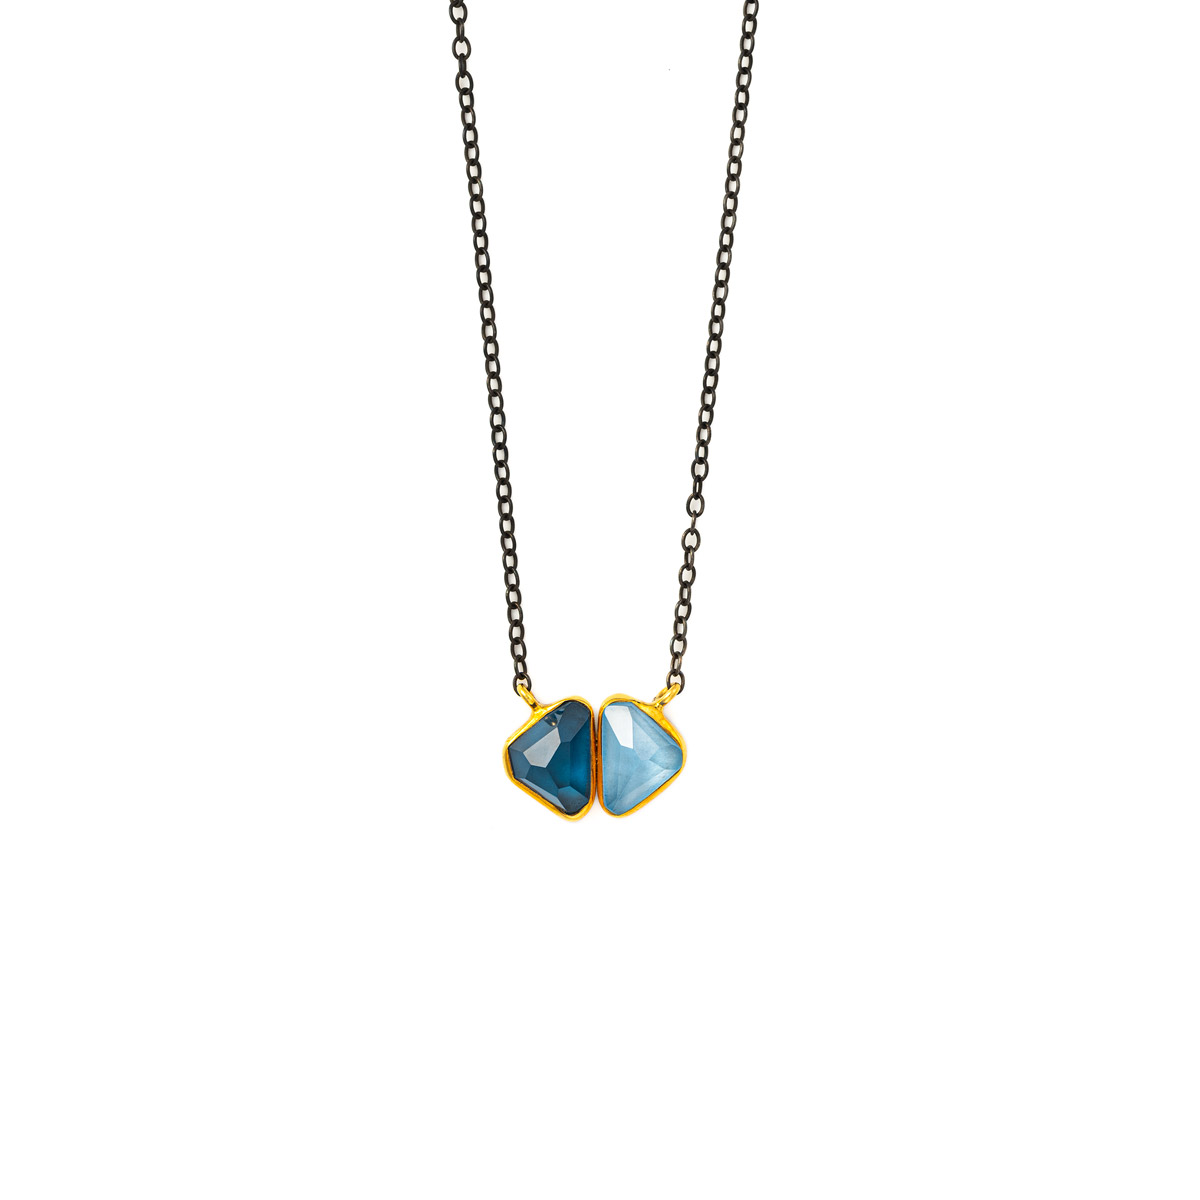 Aqua Marine and Topaz Necklace - 18K Gold and Sterling Silver